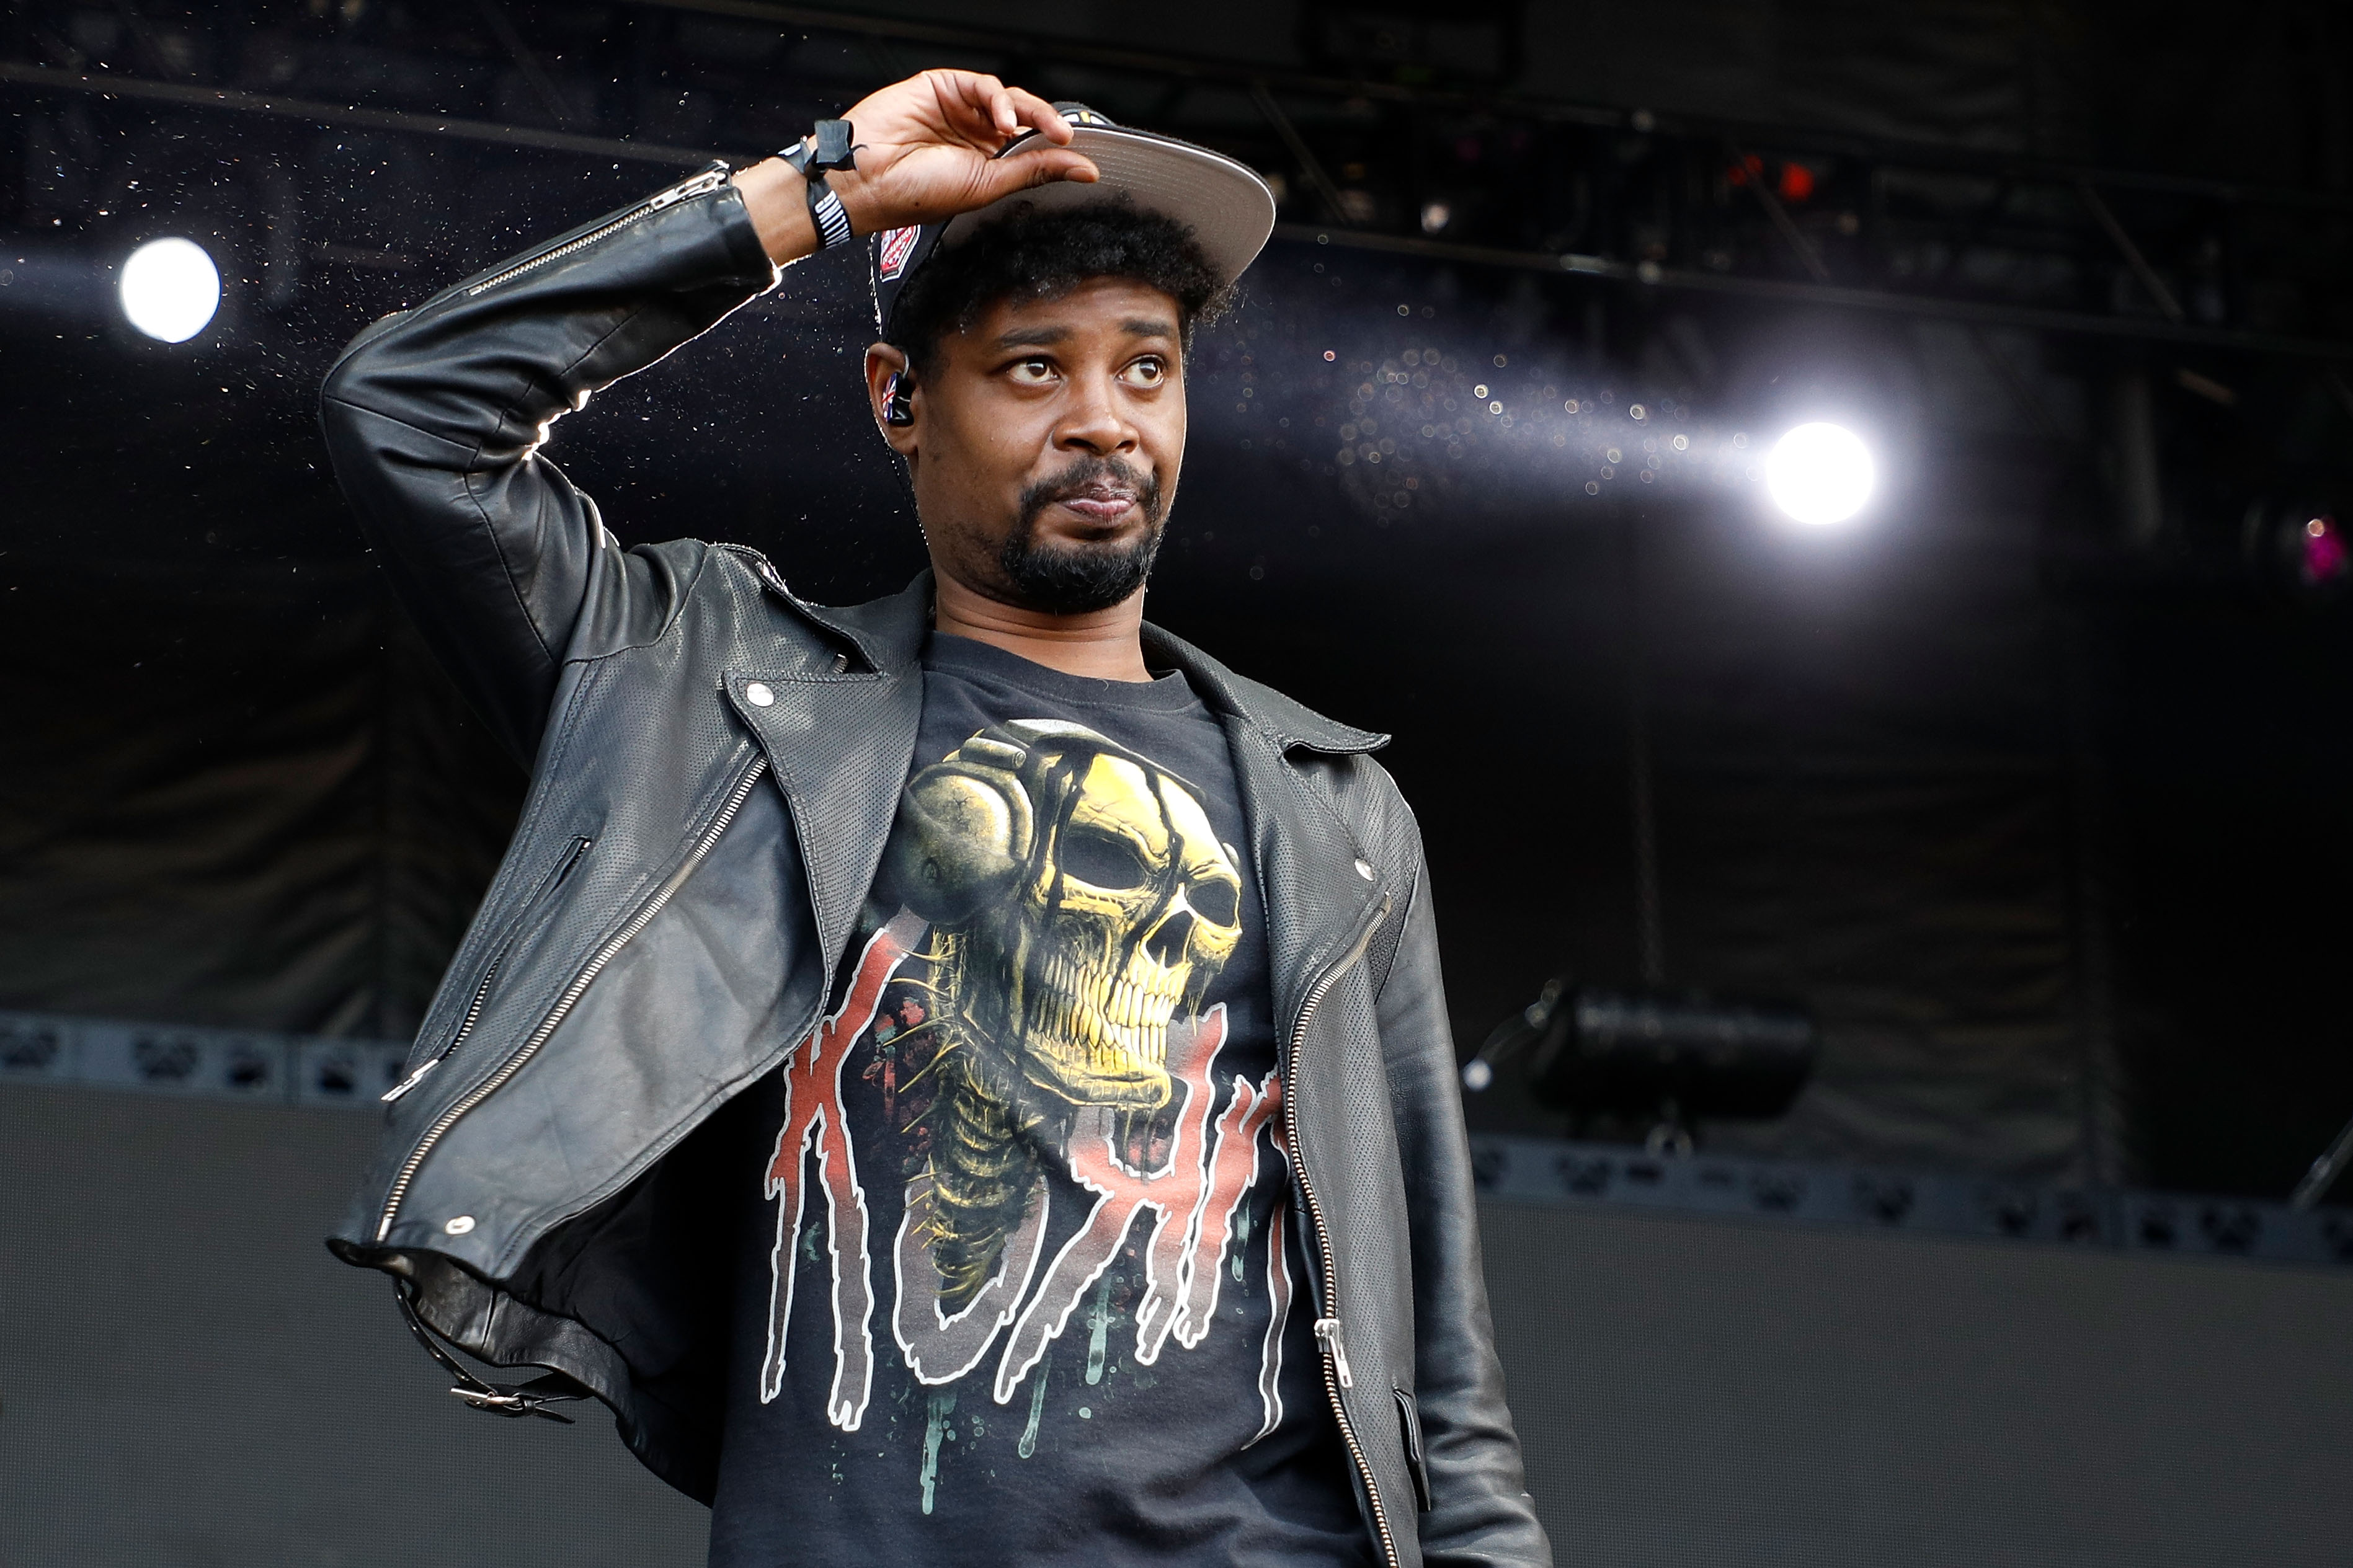 Danny Brown performing at Boston Calling Music Festival on May 27, 2017, in Boston, Massachusetts. | Source: Getty Images